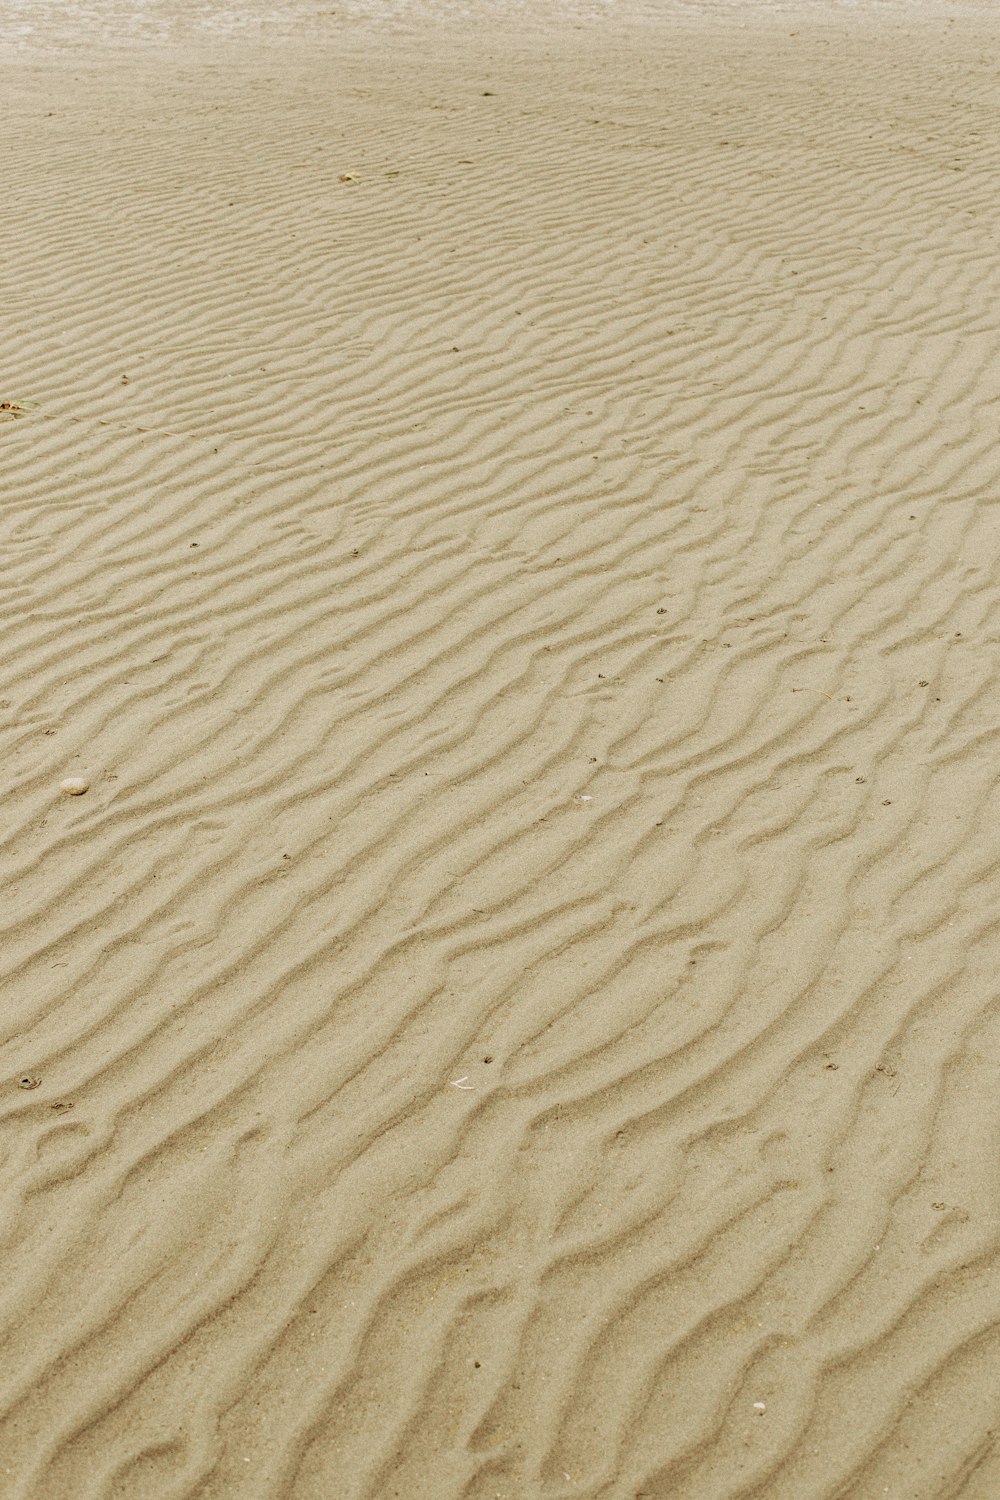 white sand with brown sand